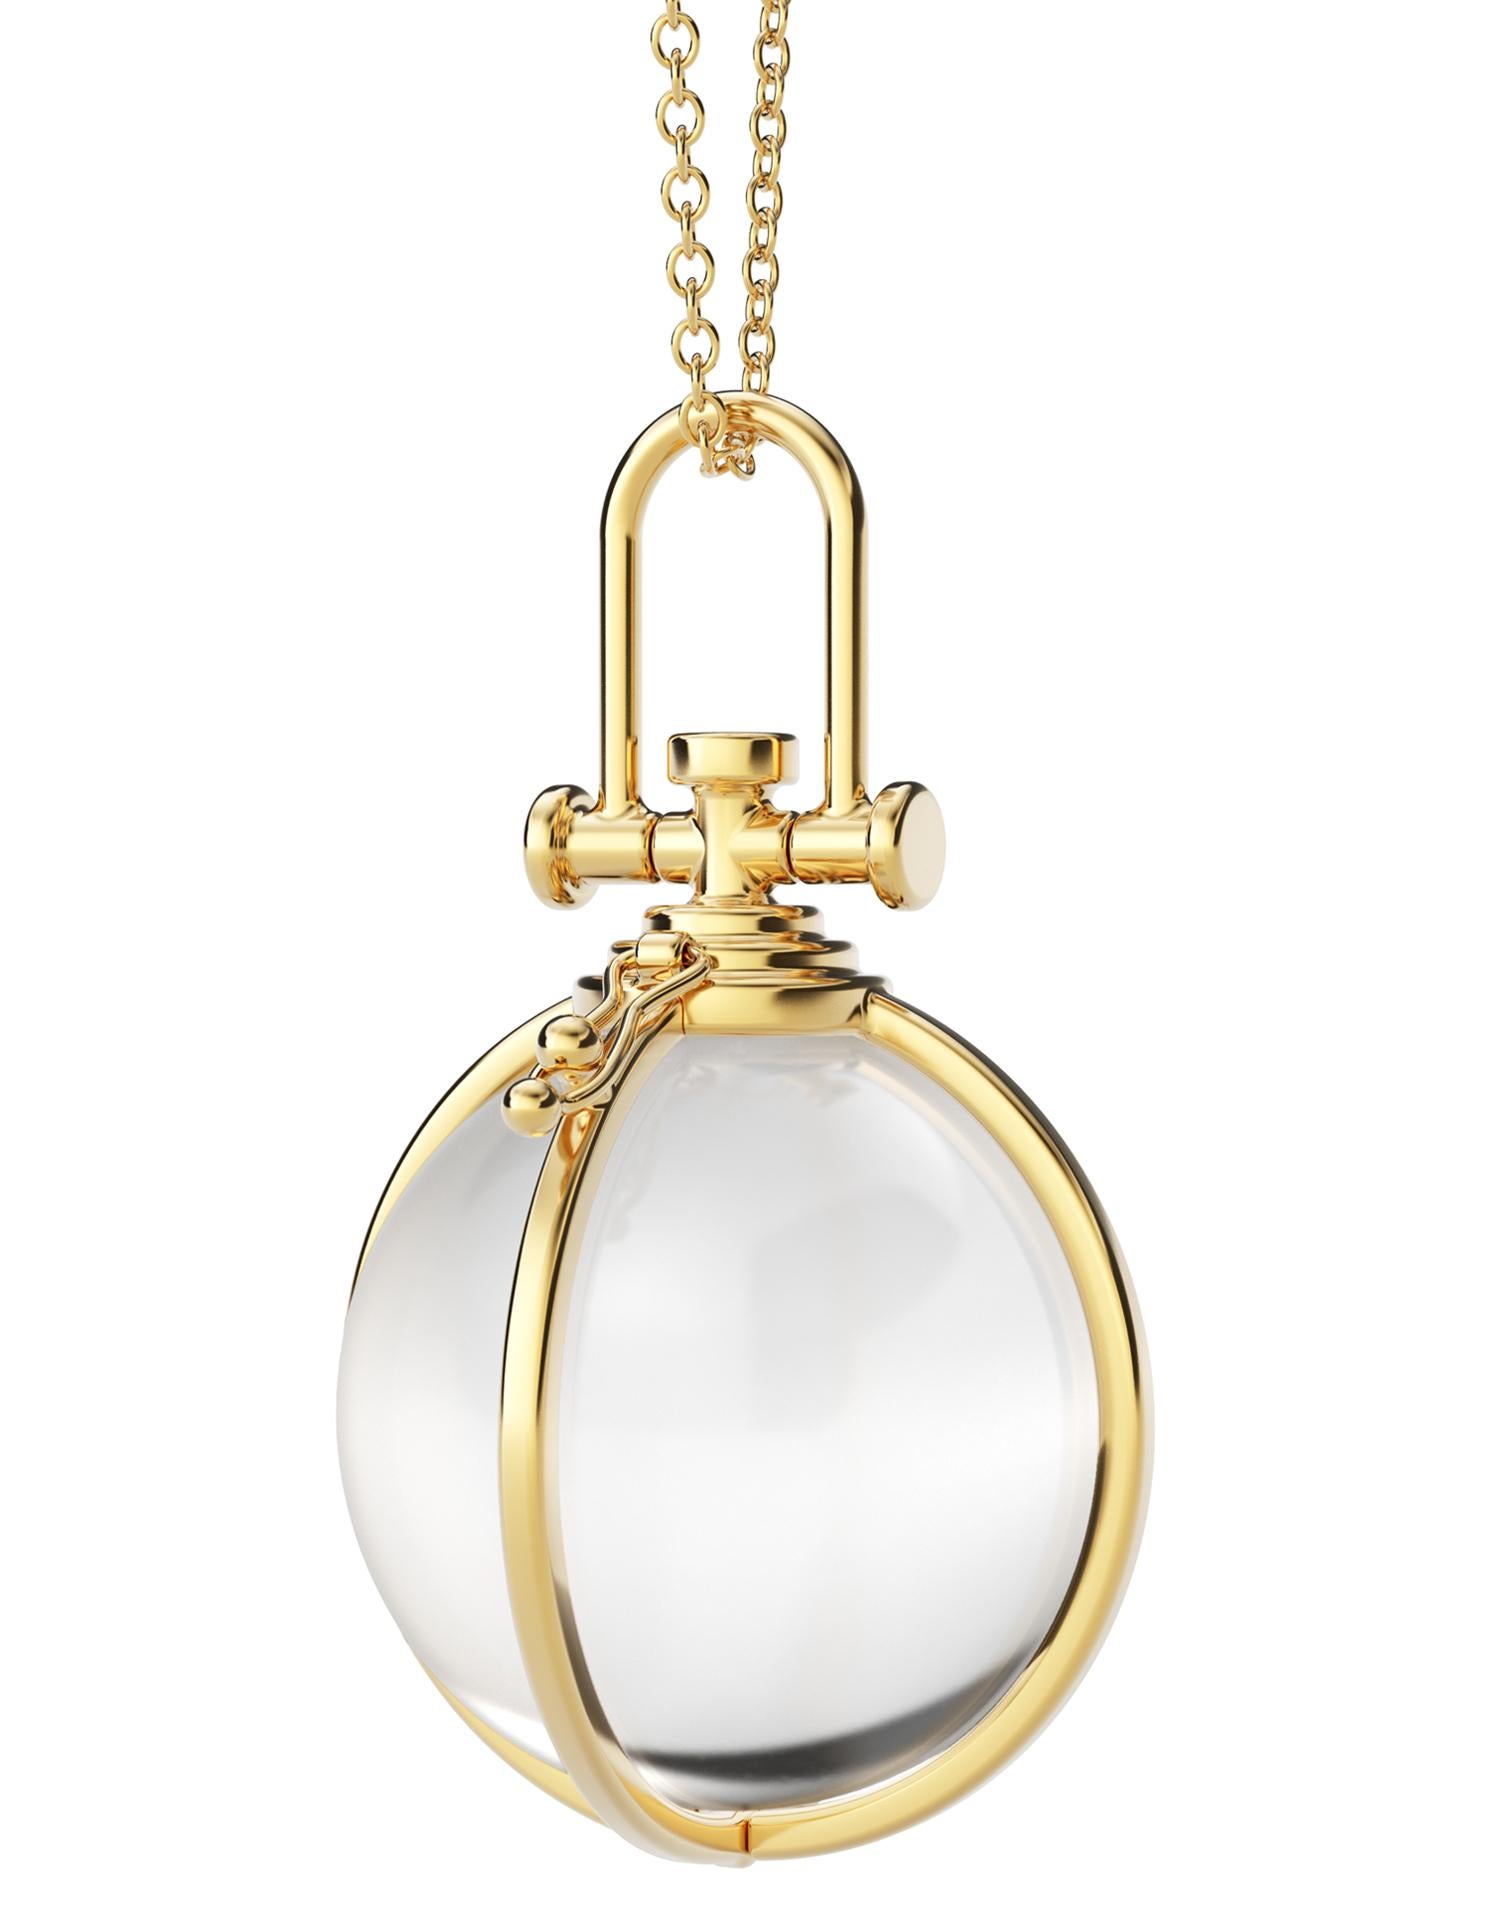 Rebecca Li designs sacred and mindfulness jewelry. 
This minimalism crystal orb necklace is from her Crystal Orb Collection. The main design element used is the sacred geometry circle. It represents oneness. 
Natural rock crystal is considered to be